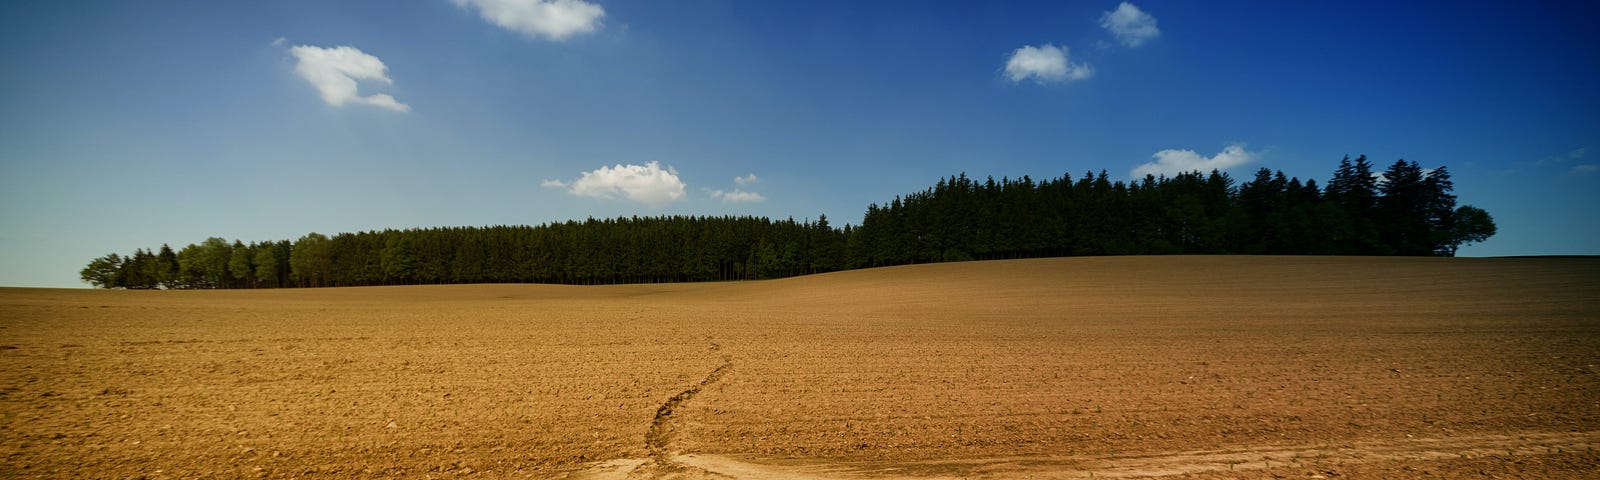 a wide field of dirt with a forest in the distance, under a blue sky